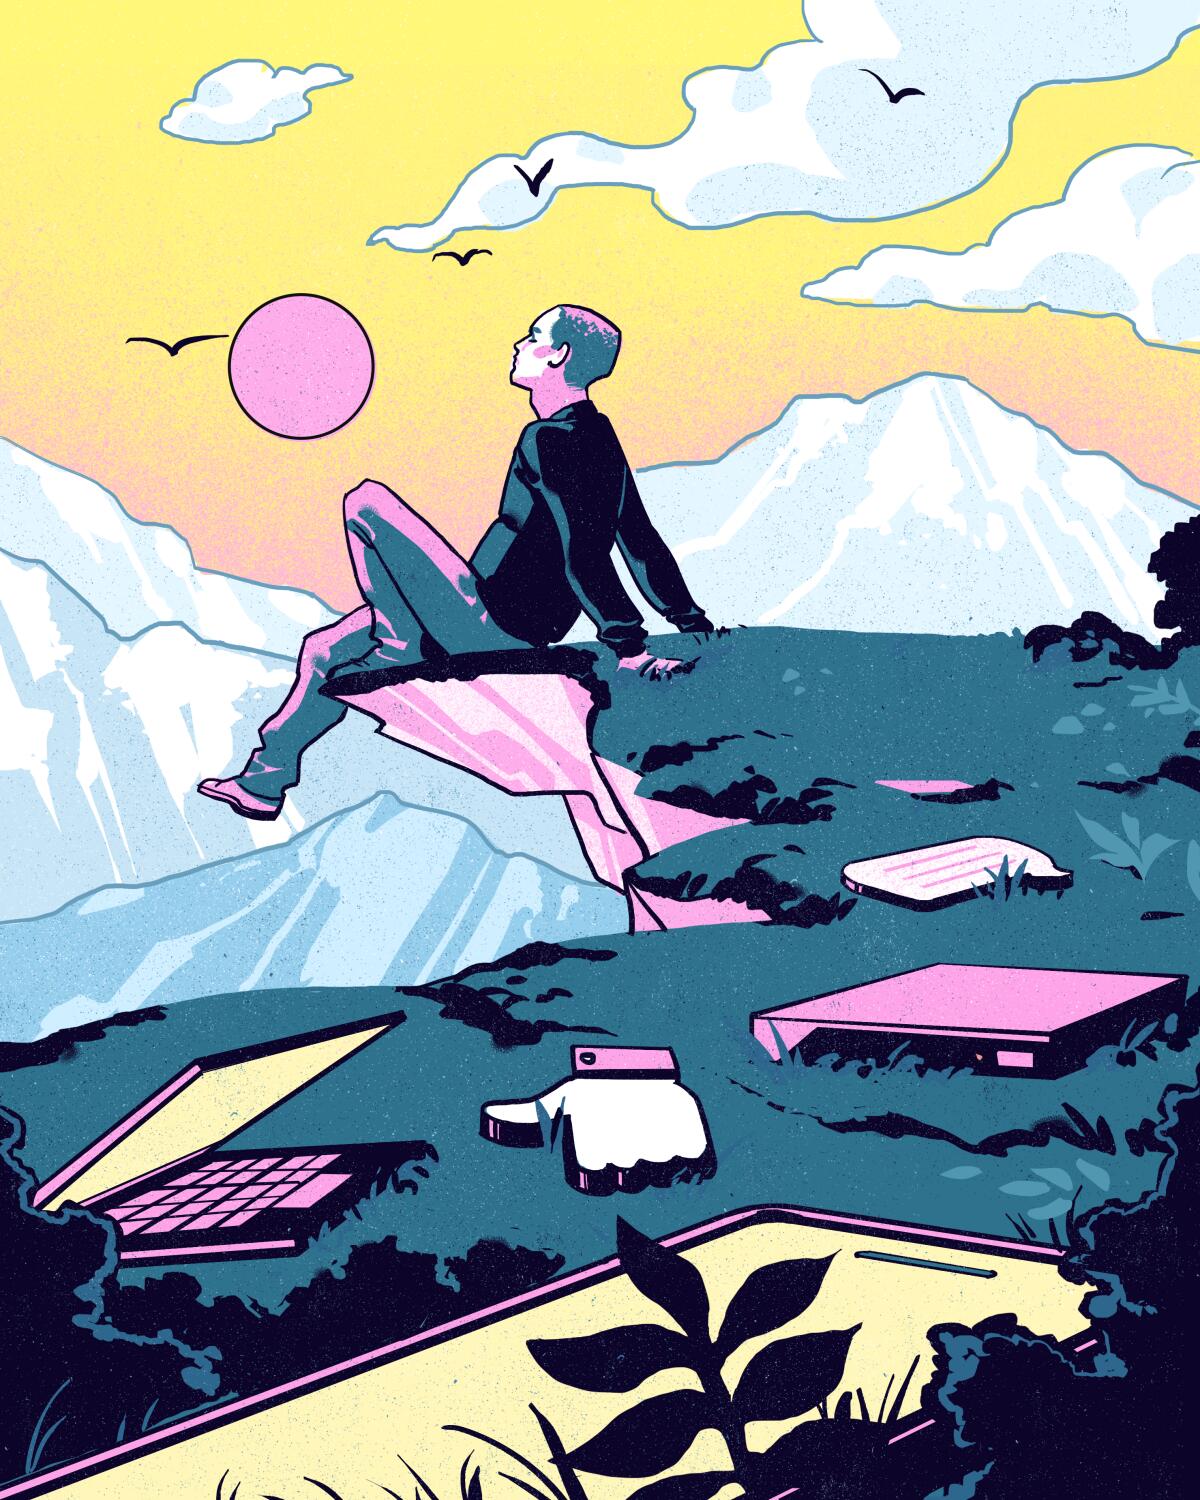 An illustration of a person sitting on a promontory looking out toward a mountainous landscape.